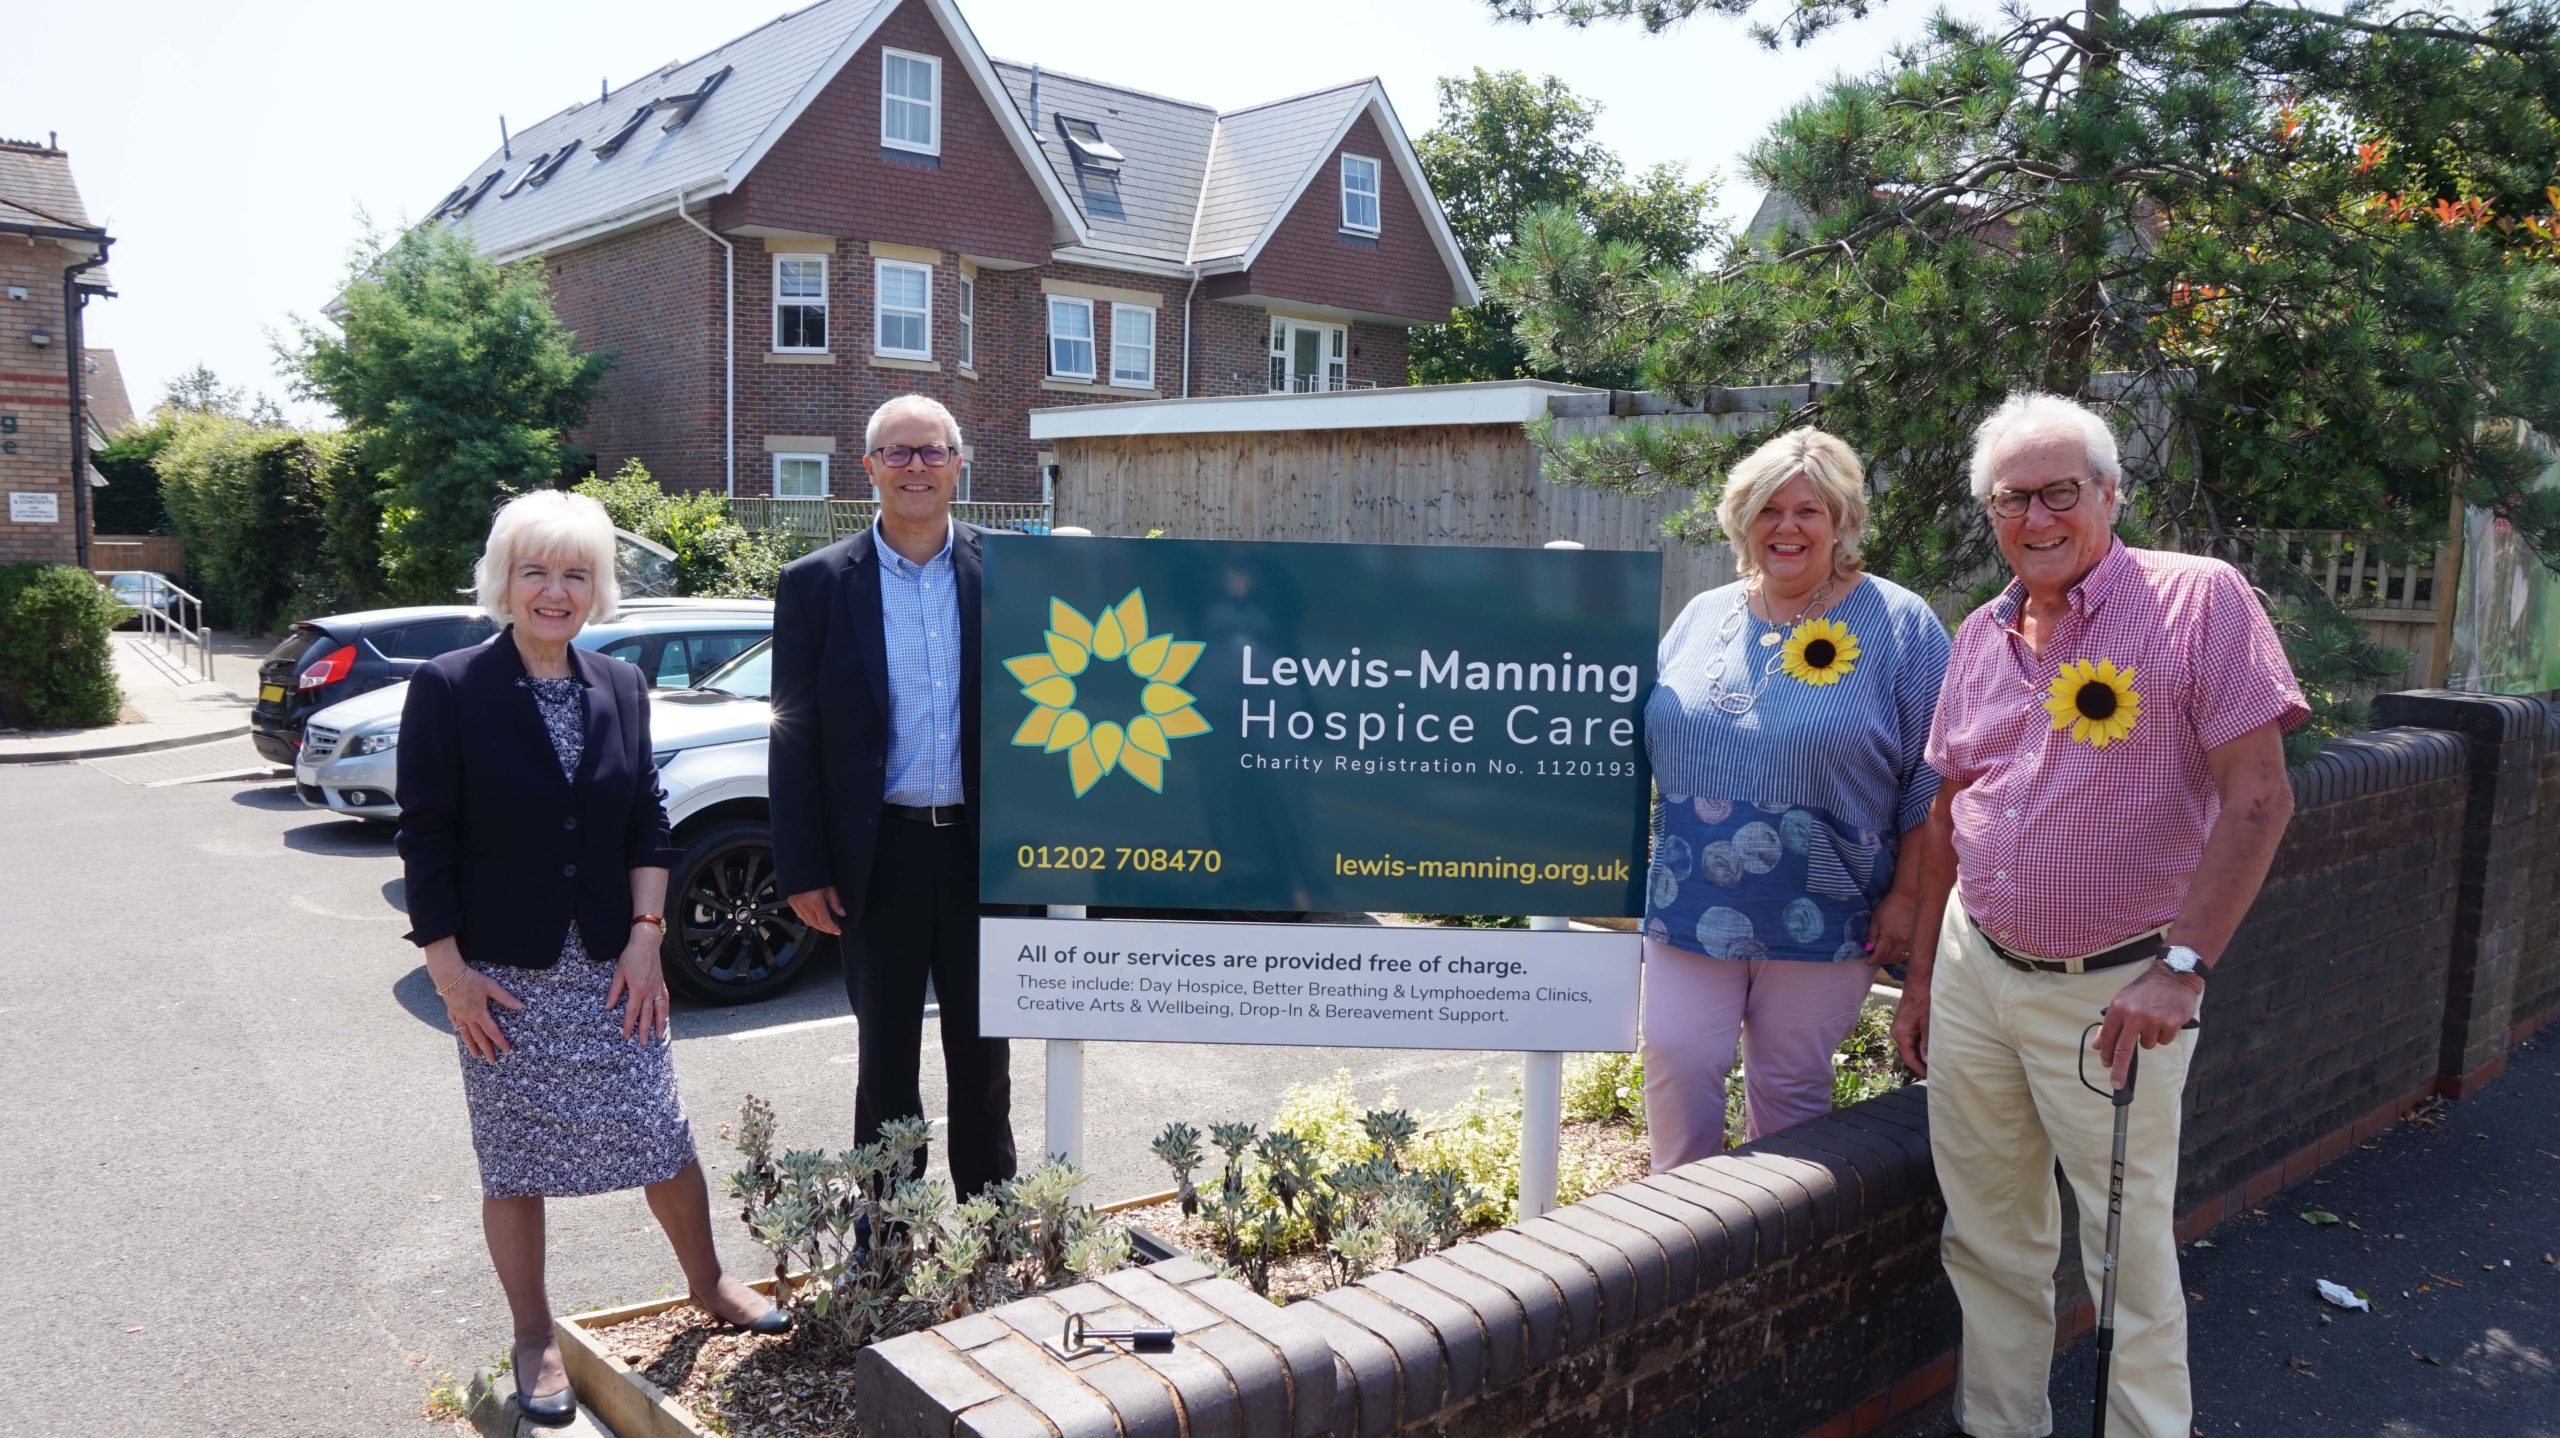 Care South award charity partner Lewis-Manning Hospice Care with £2,000 from the first ever ‘Chairman’s 2020 Fund’